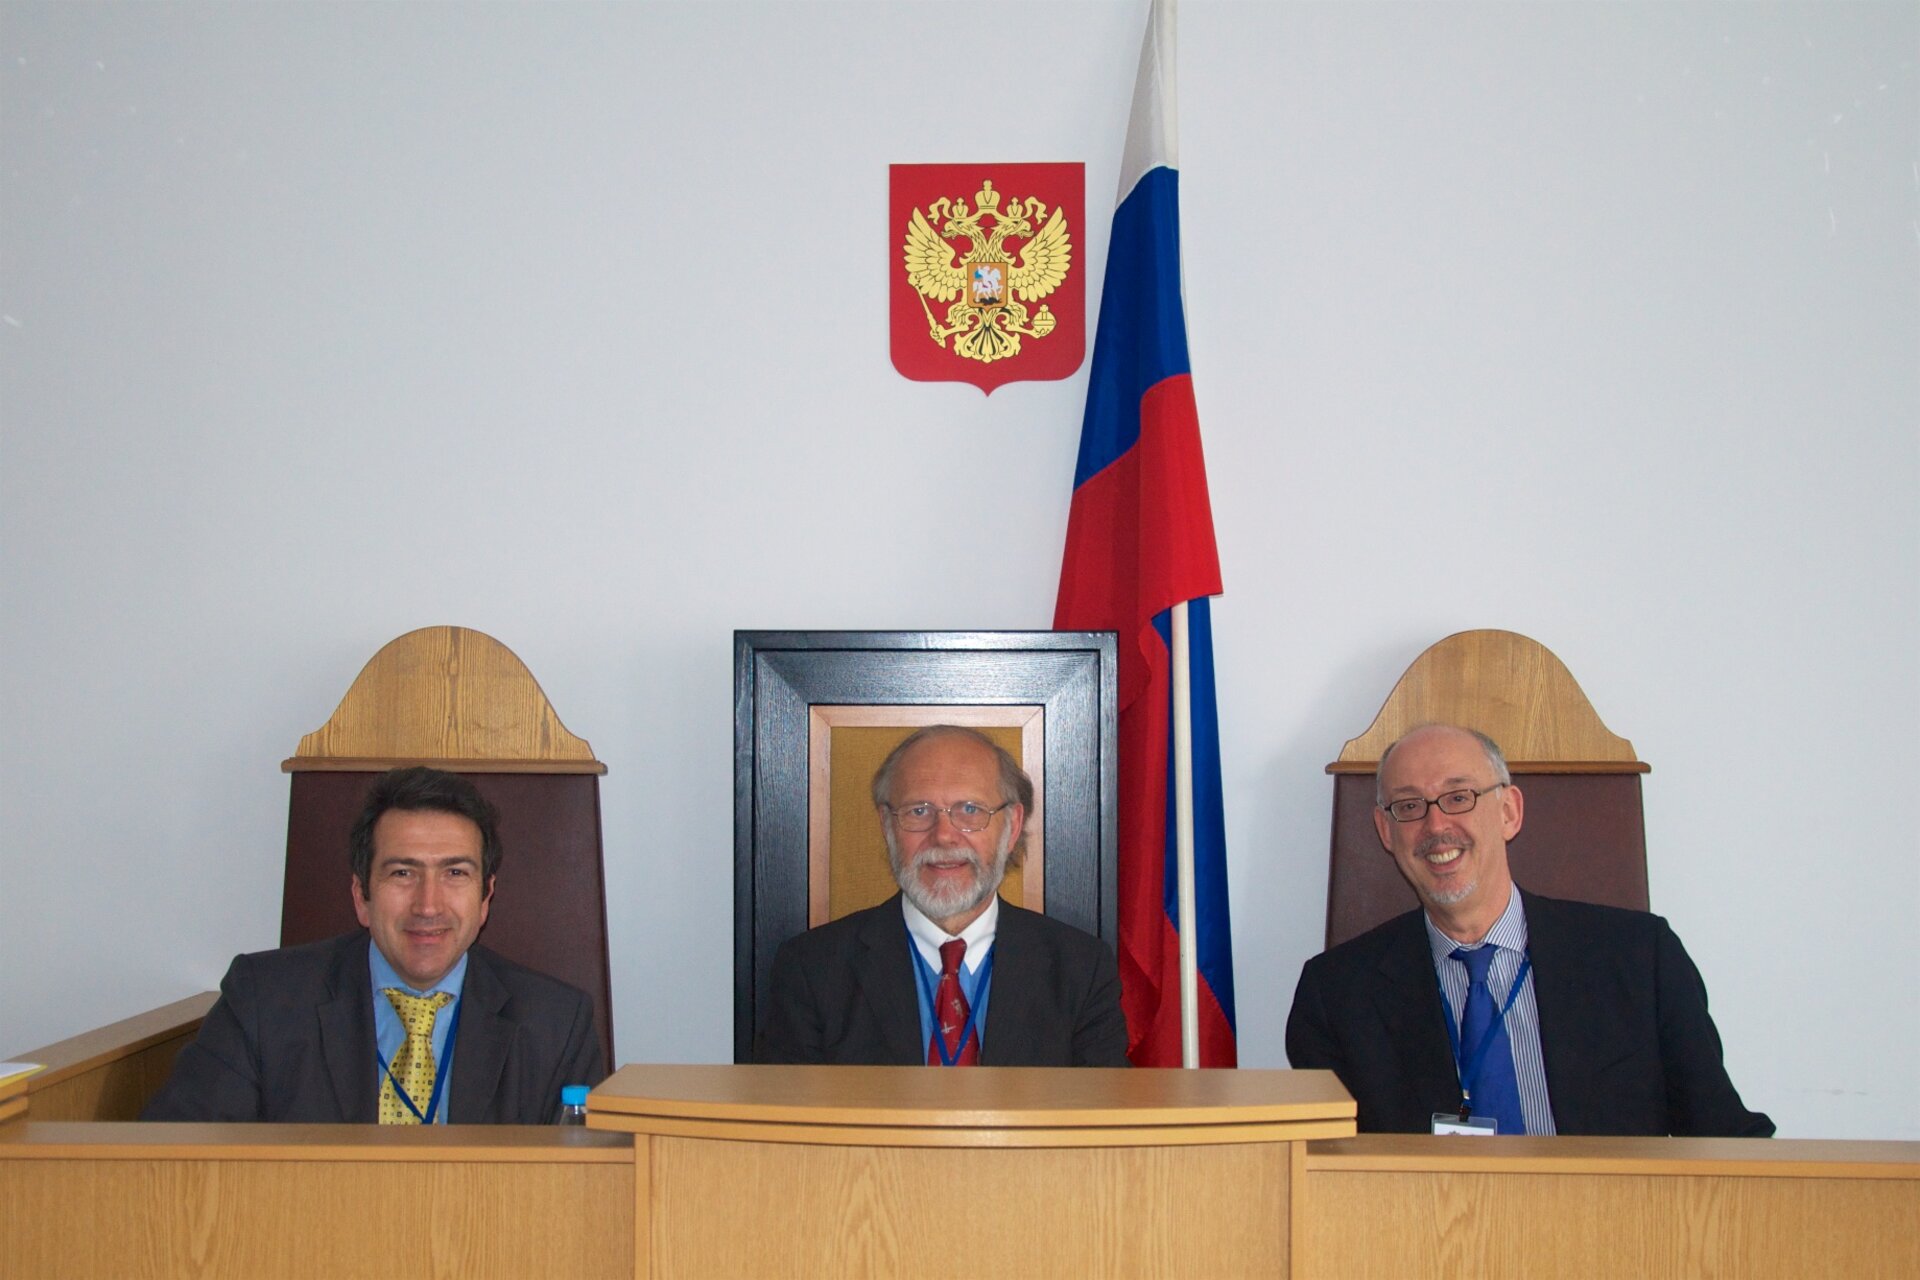 The 2011 MLMC was organised by the ECSL in collaboration with Saint Petersburg State University. From left to right: Dr. Marco Ferrazani, Prof. Armel Kerrest & Prof. Sergio Marchisio